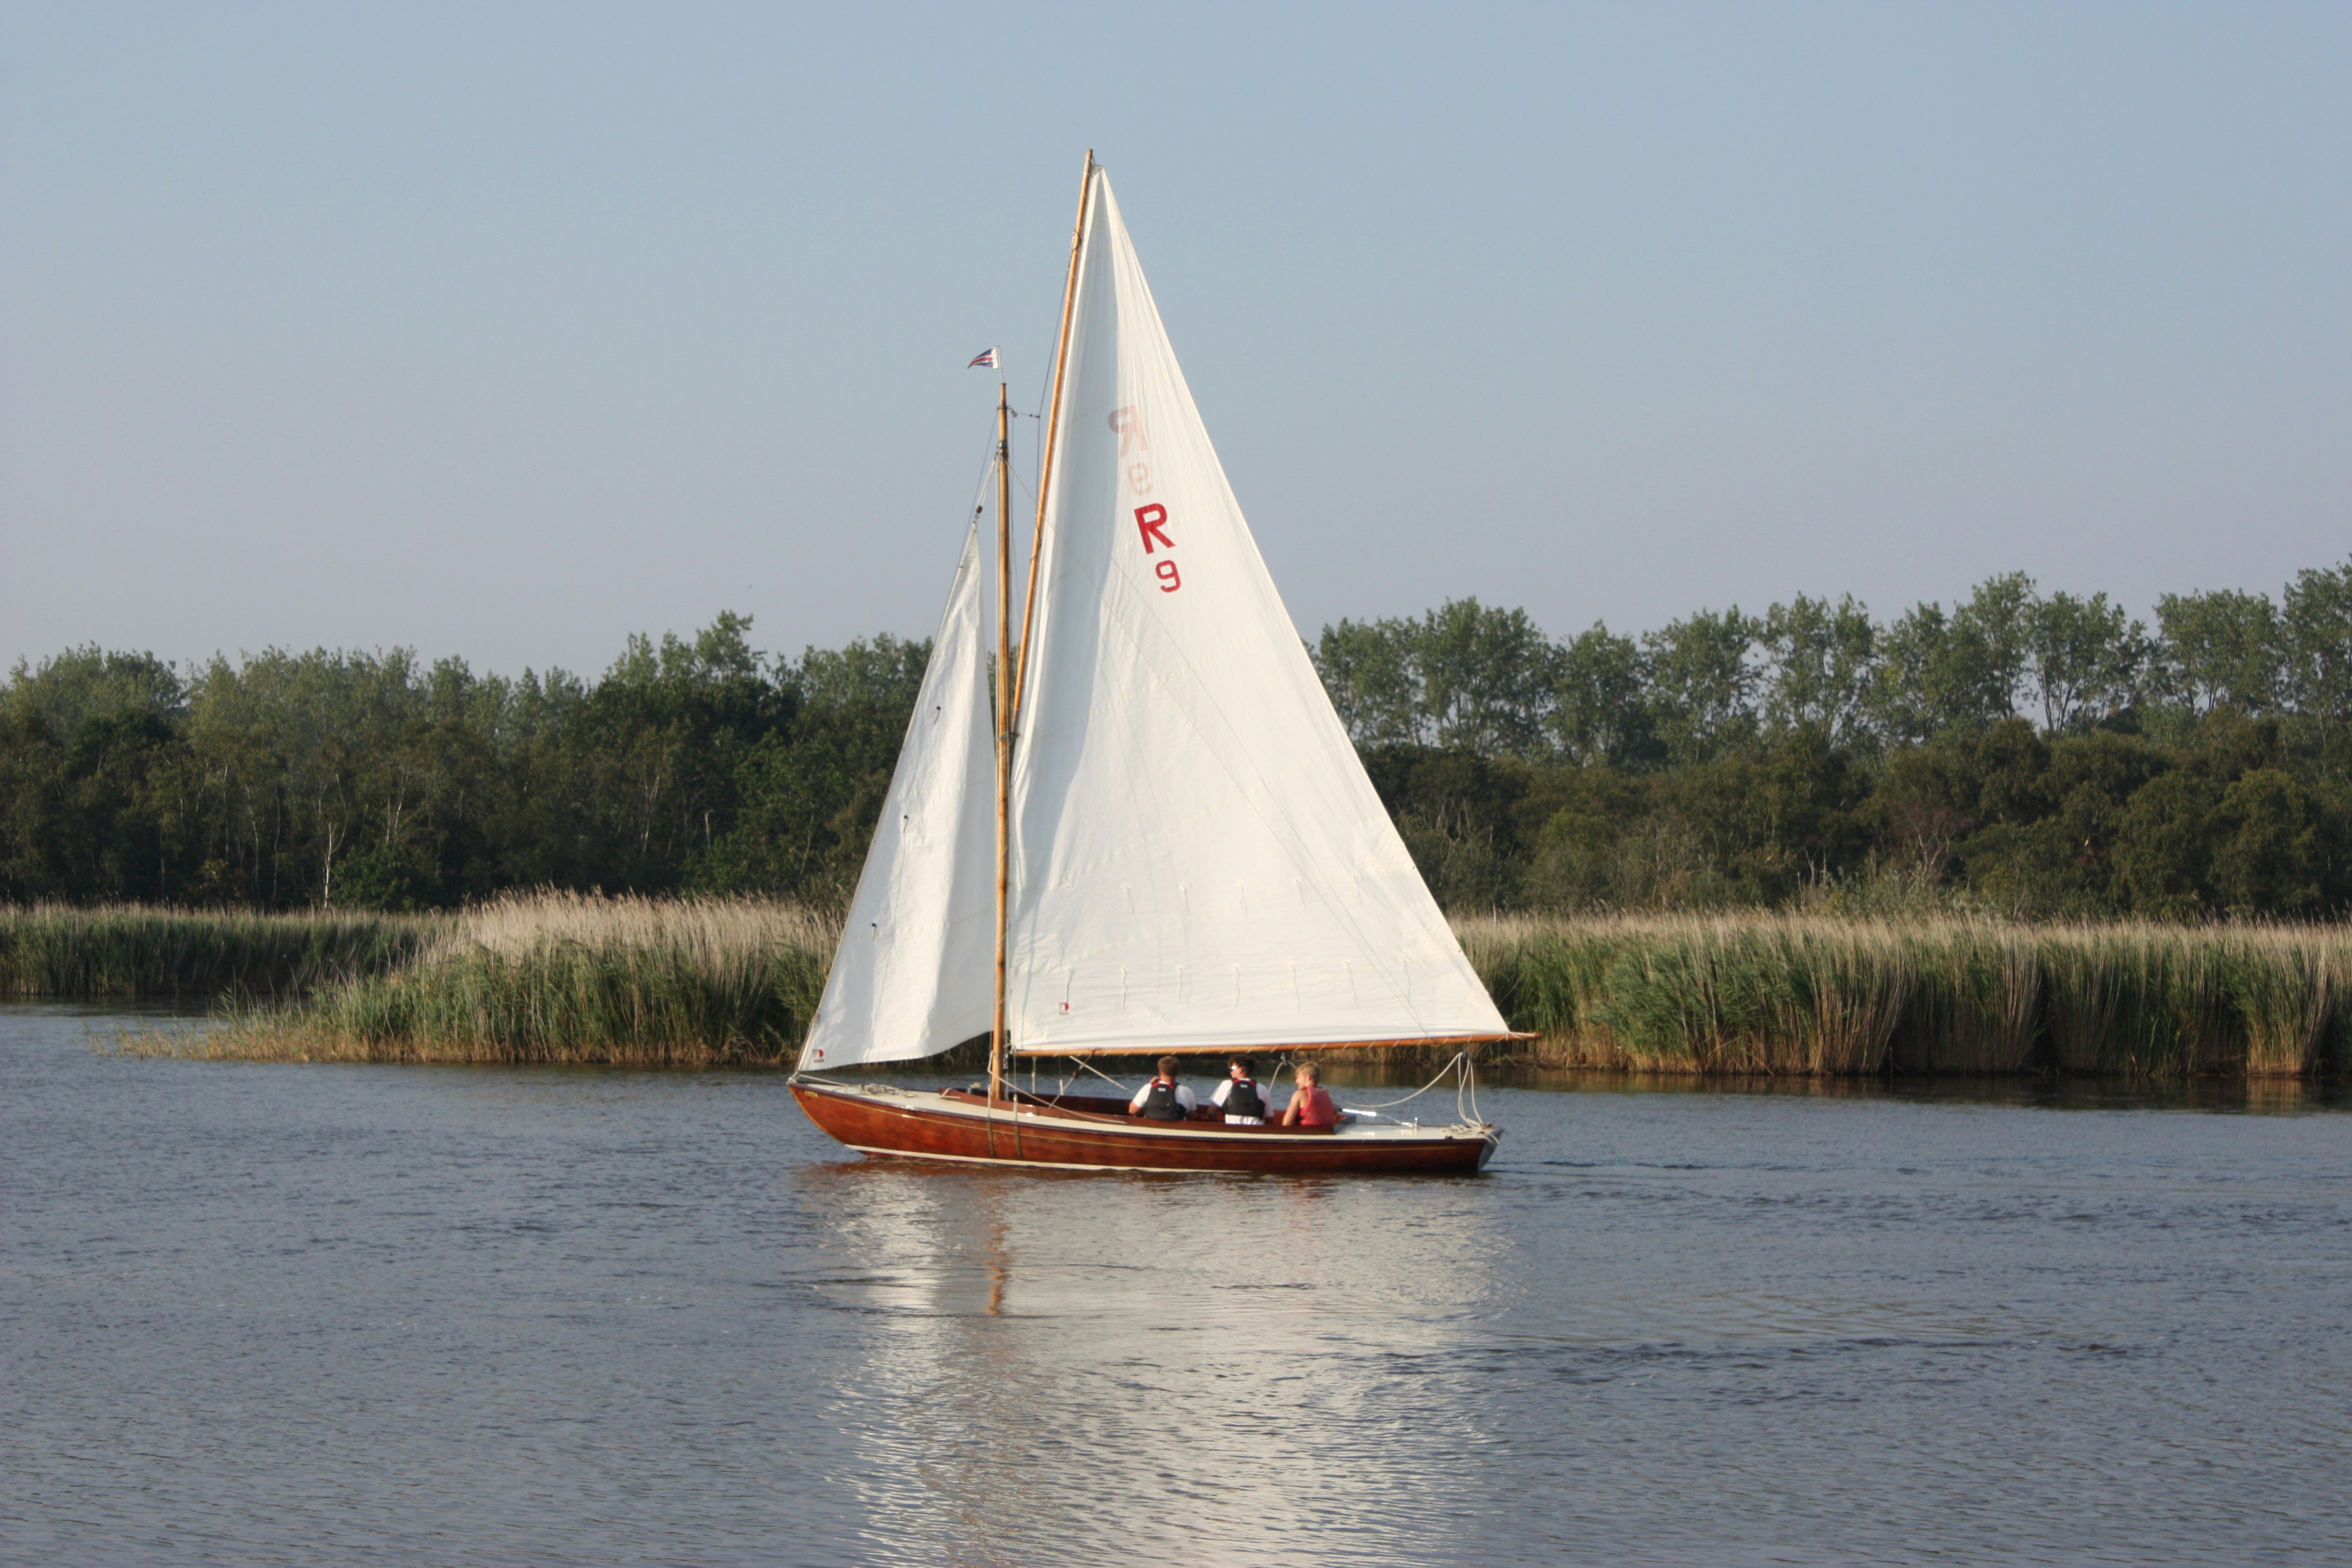 Yachting on Horsey Mere in late summer afternoon